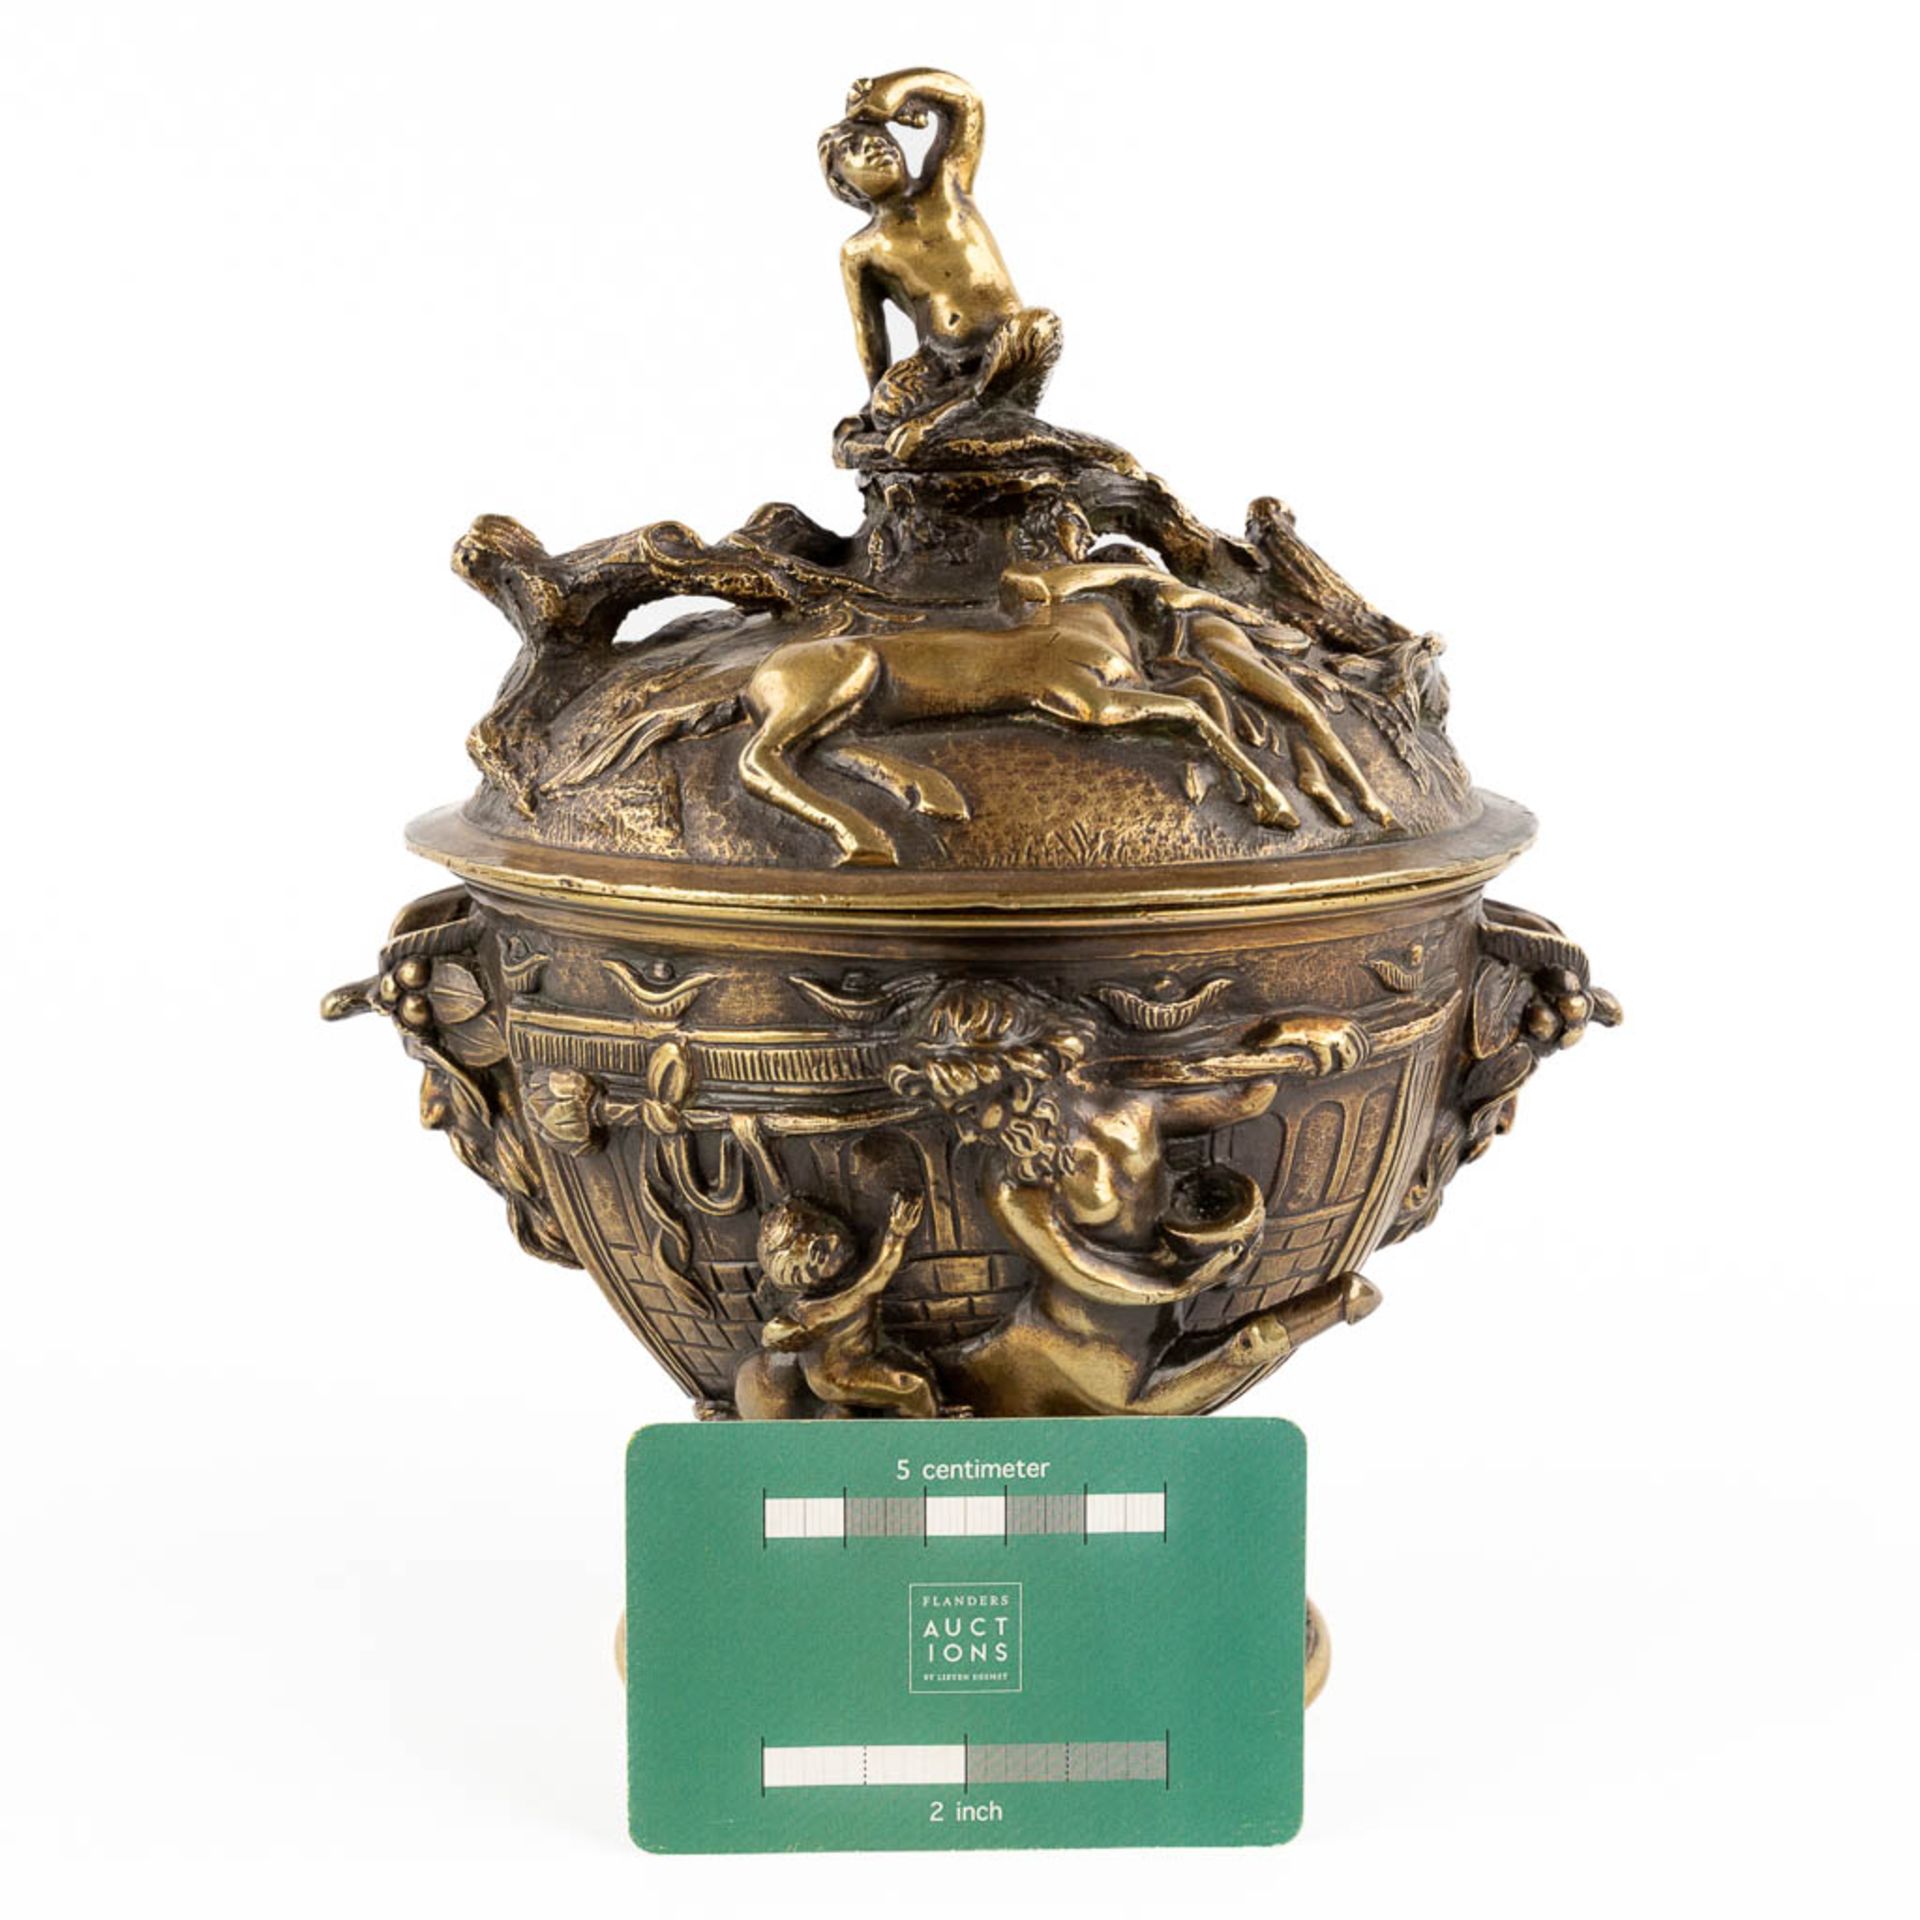 A pot with a lid, decorated with mythological figurines, patinated bronze. (H:23 x D:16 cm) - Image 2 of 16